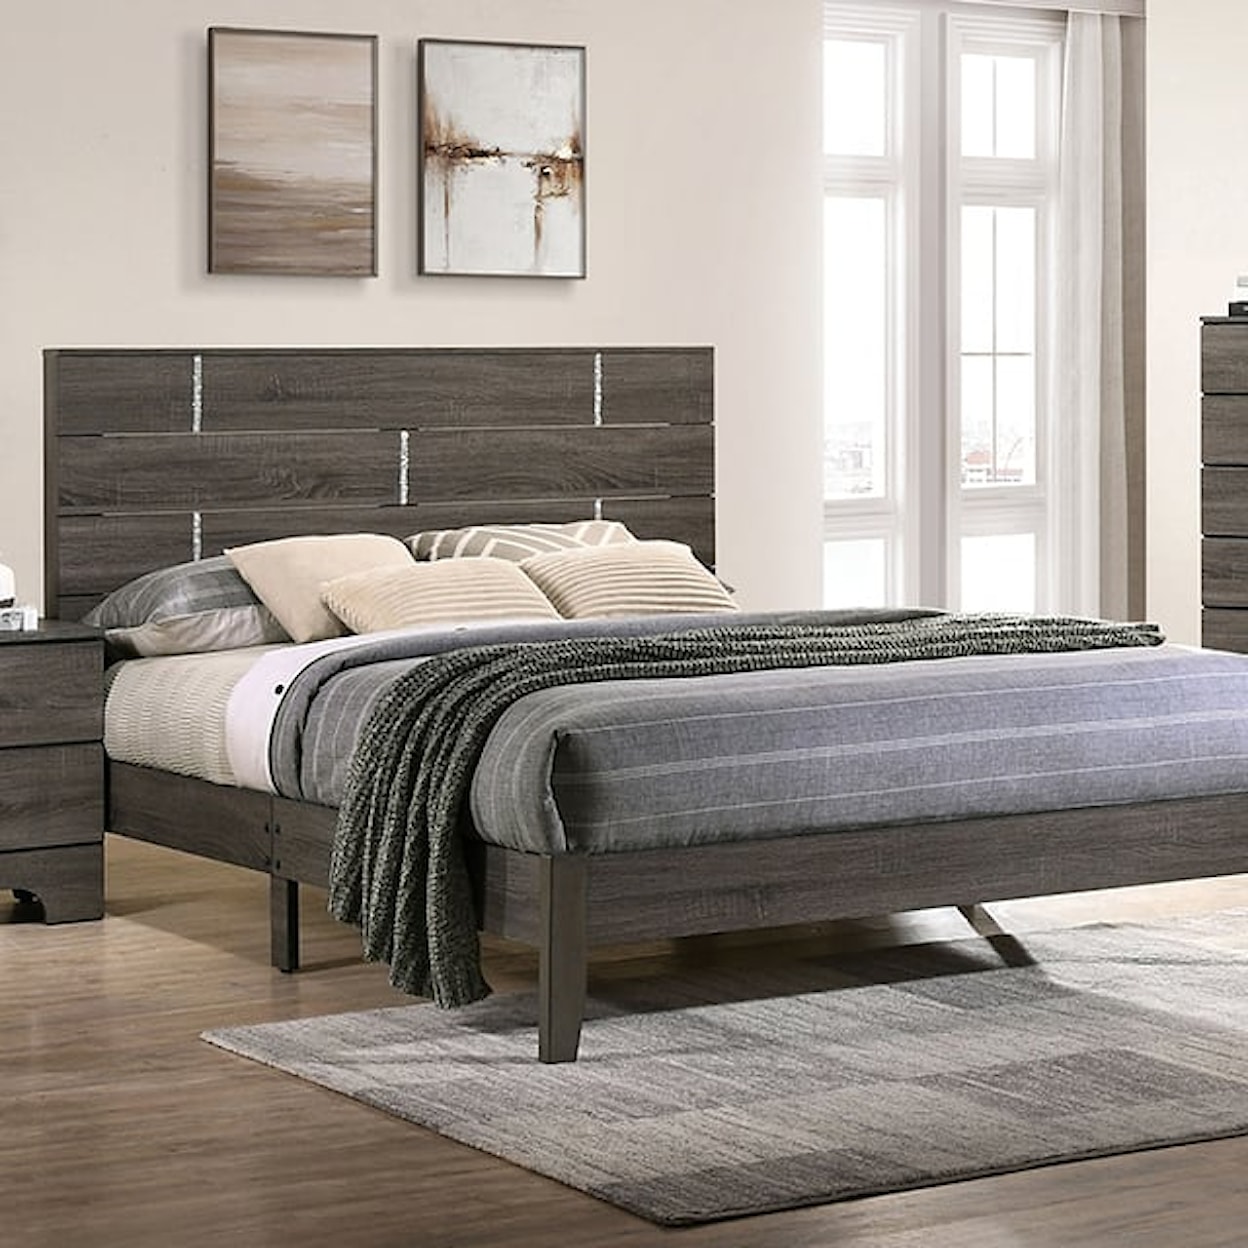 Furniture of America Richterswil King Bed